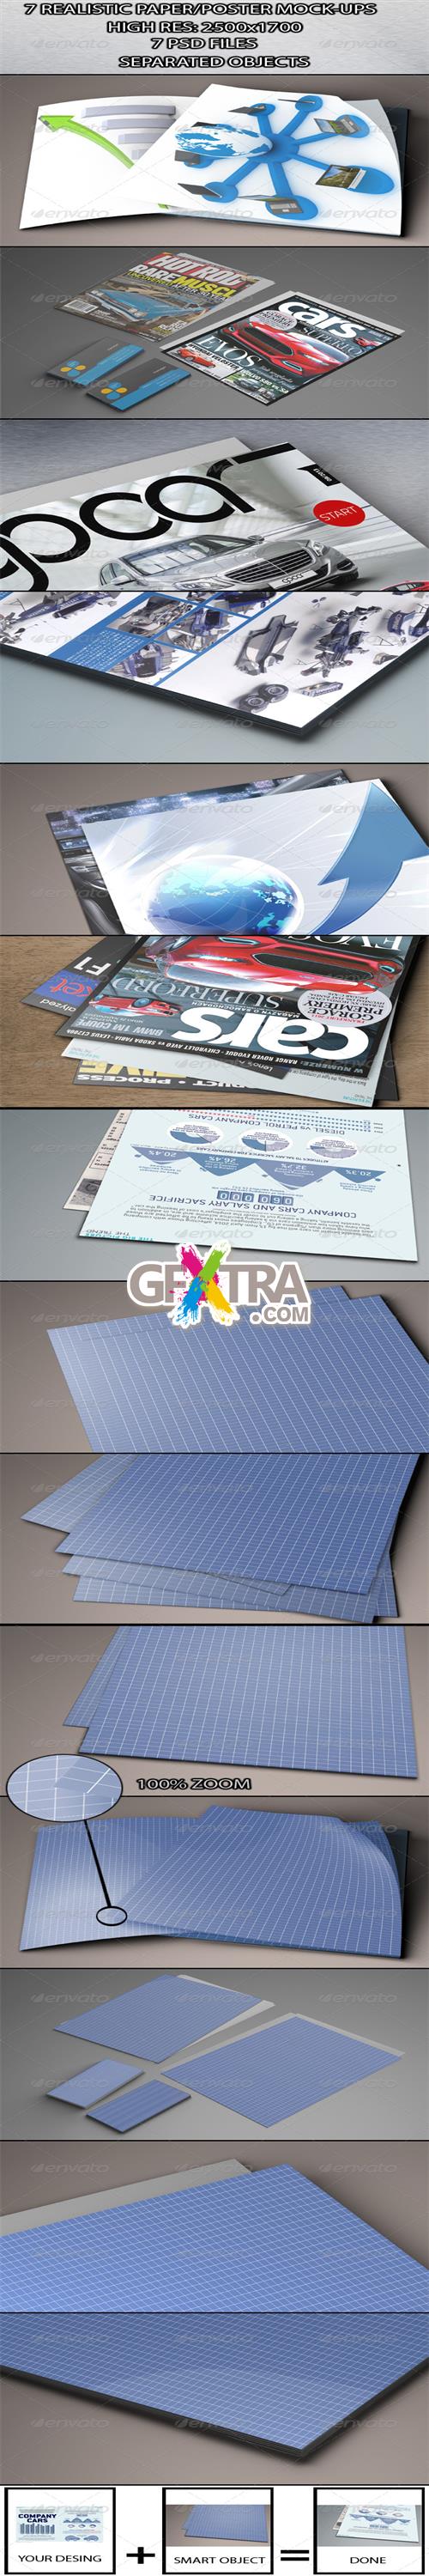 GraphicRiver - 7 Realistic Paper/Poster Mock-ups